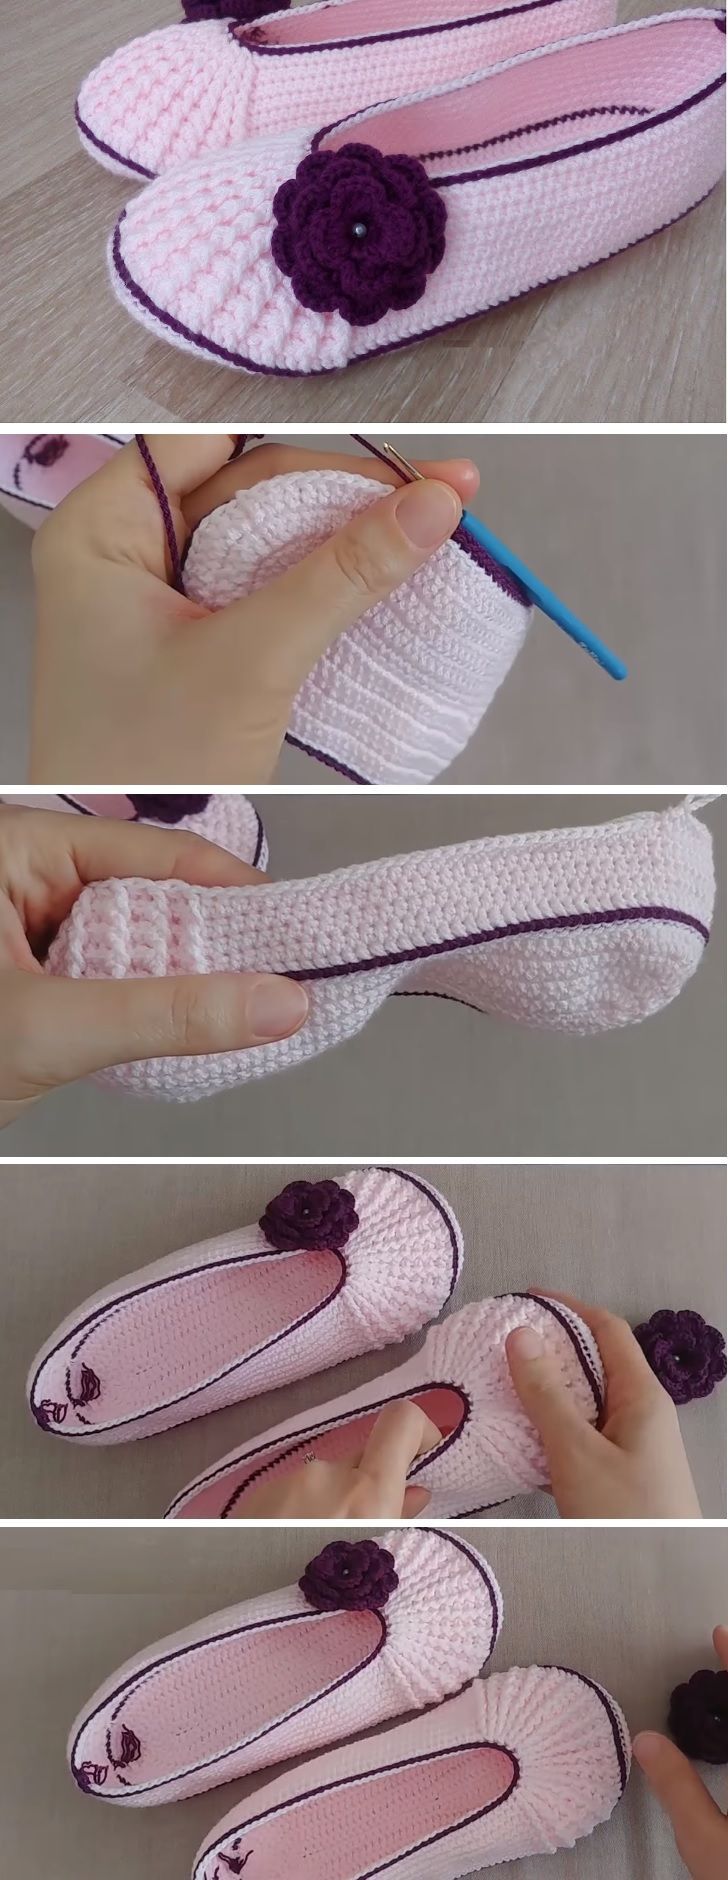 How to Crochet These Beautiful Slippers - Crochet and Knitting Patterns